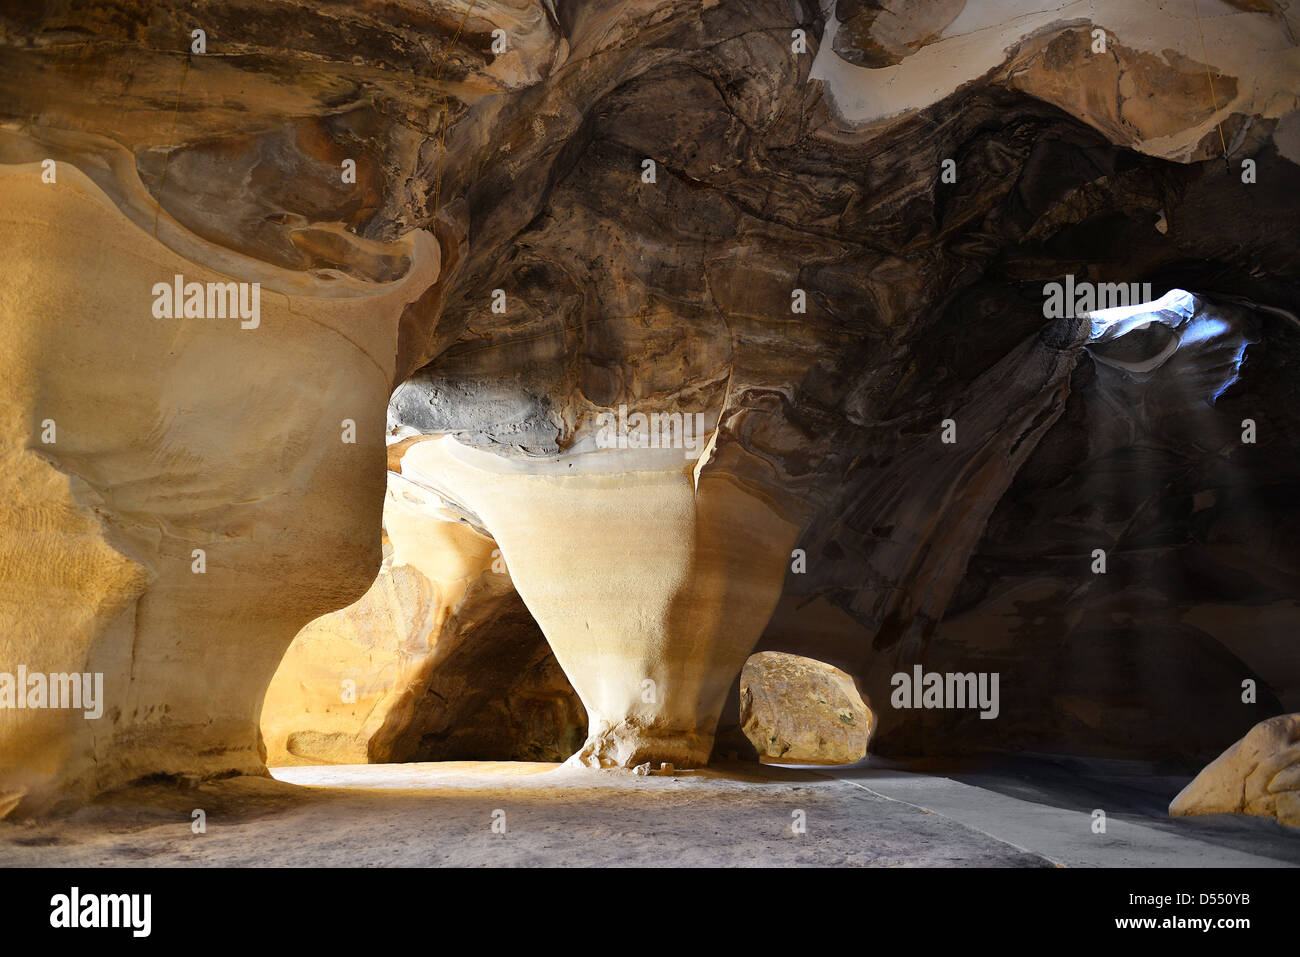 Bell cave at Tel-Maresha - Beit Guvrin National Park. Stock Photo